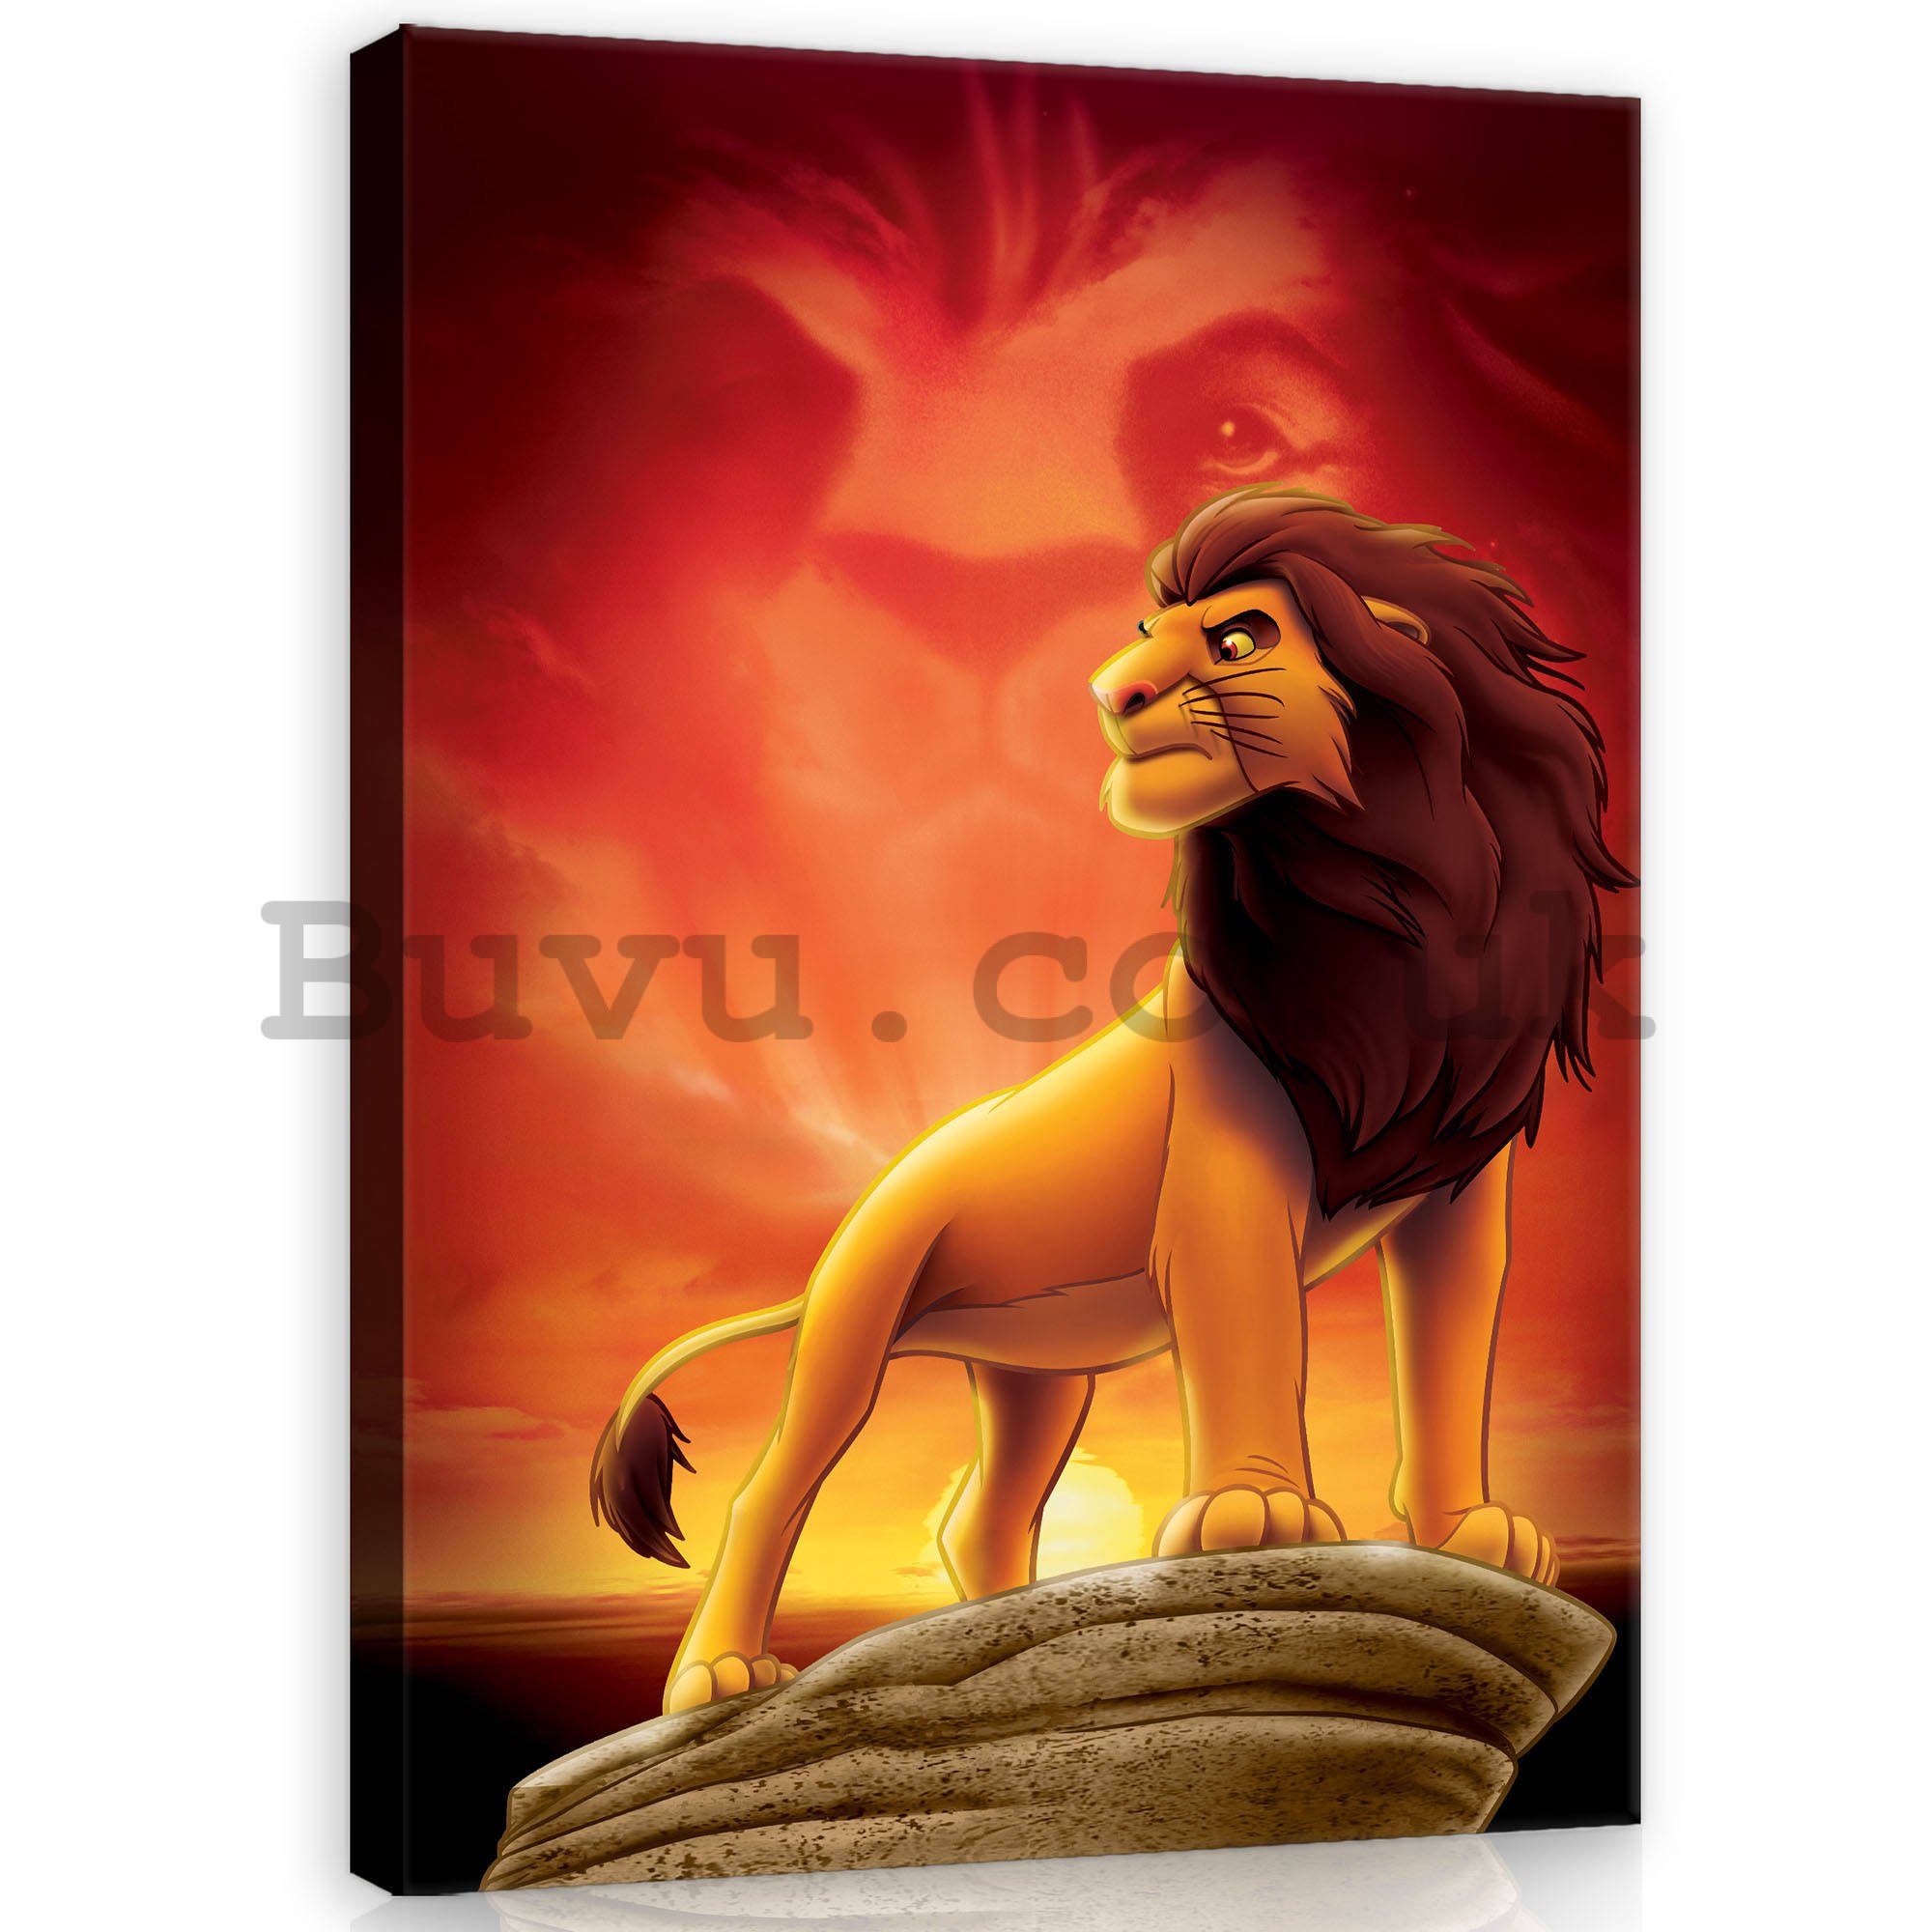 Painting on canvas: The Lion King (1) - 60x80 cm